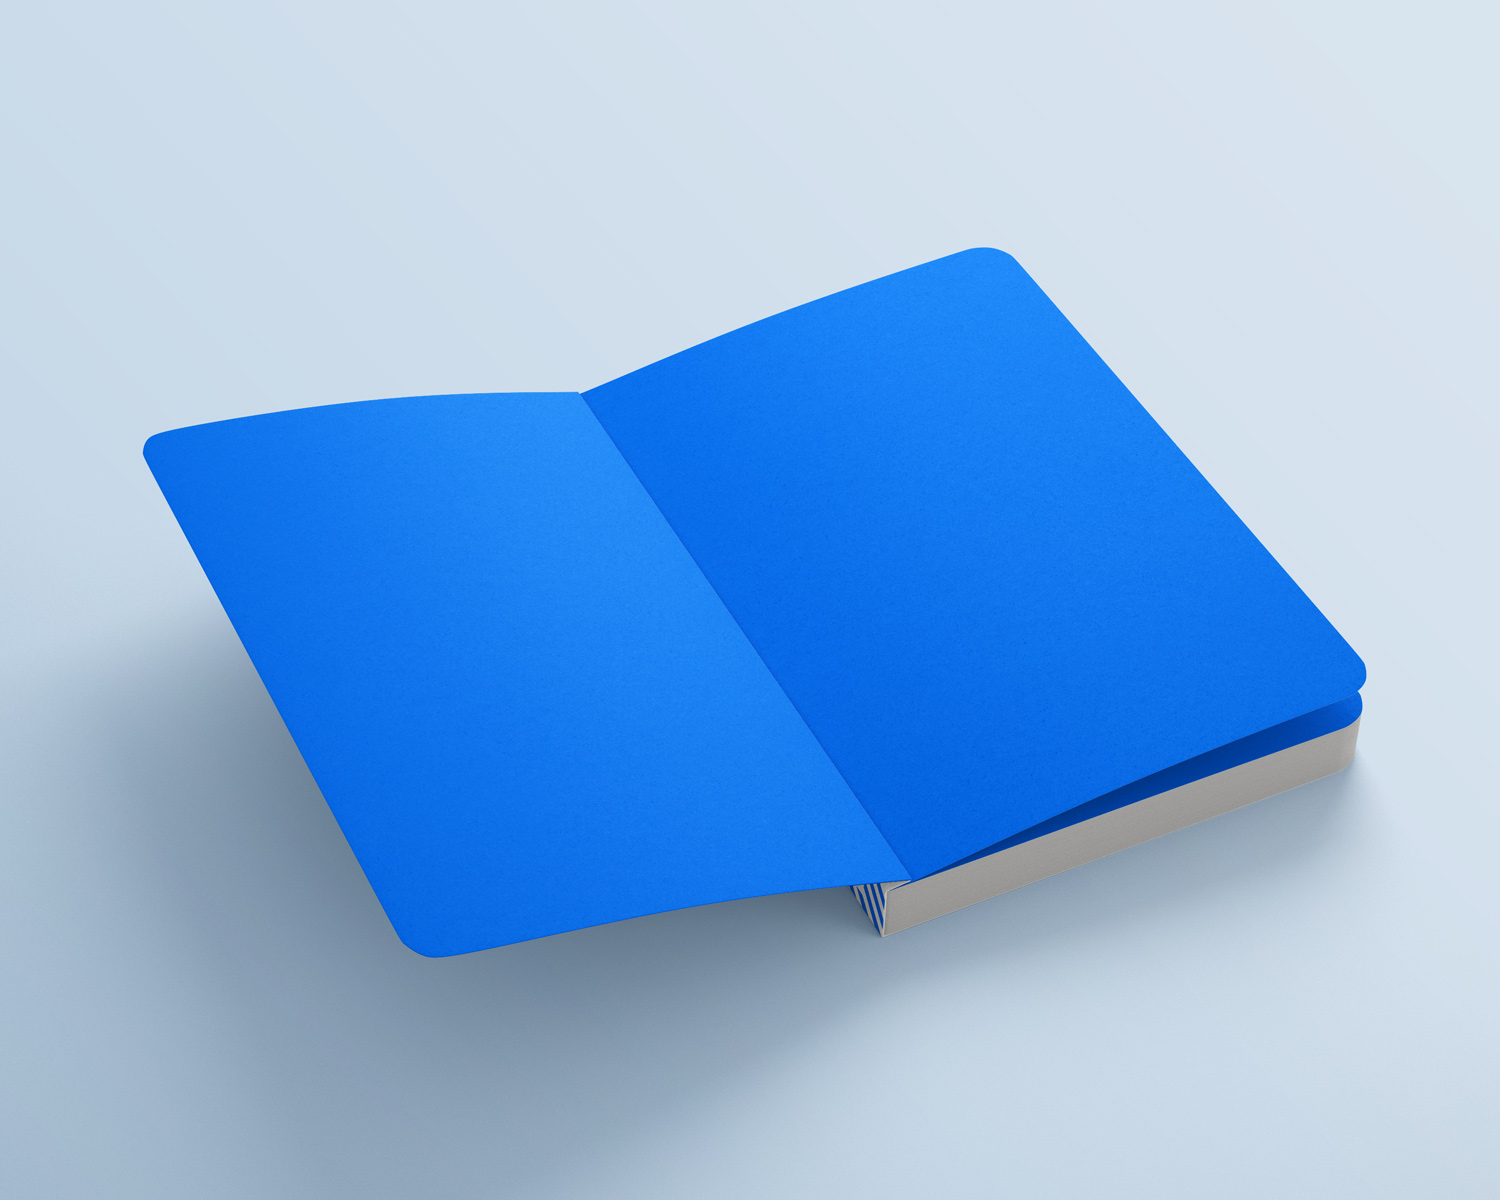 Free-Book-with-Rounded-Corners-Mockup-03